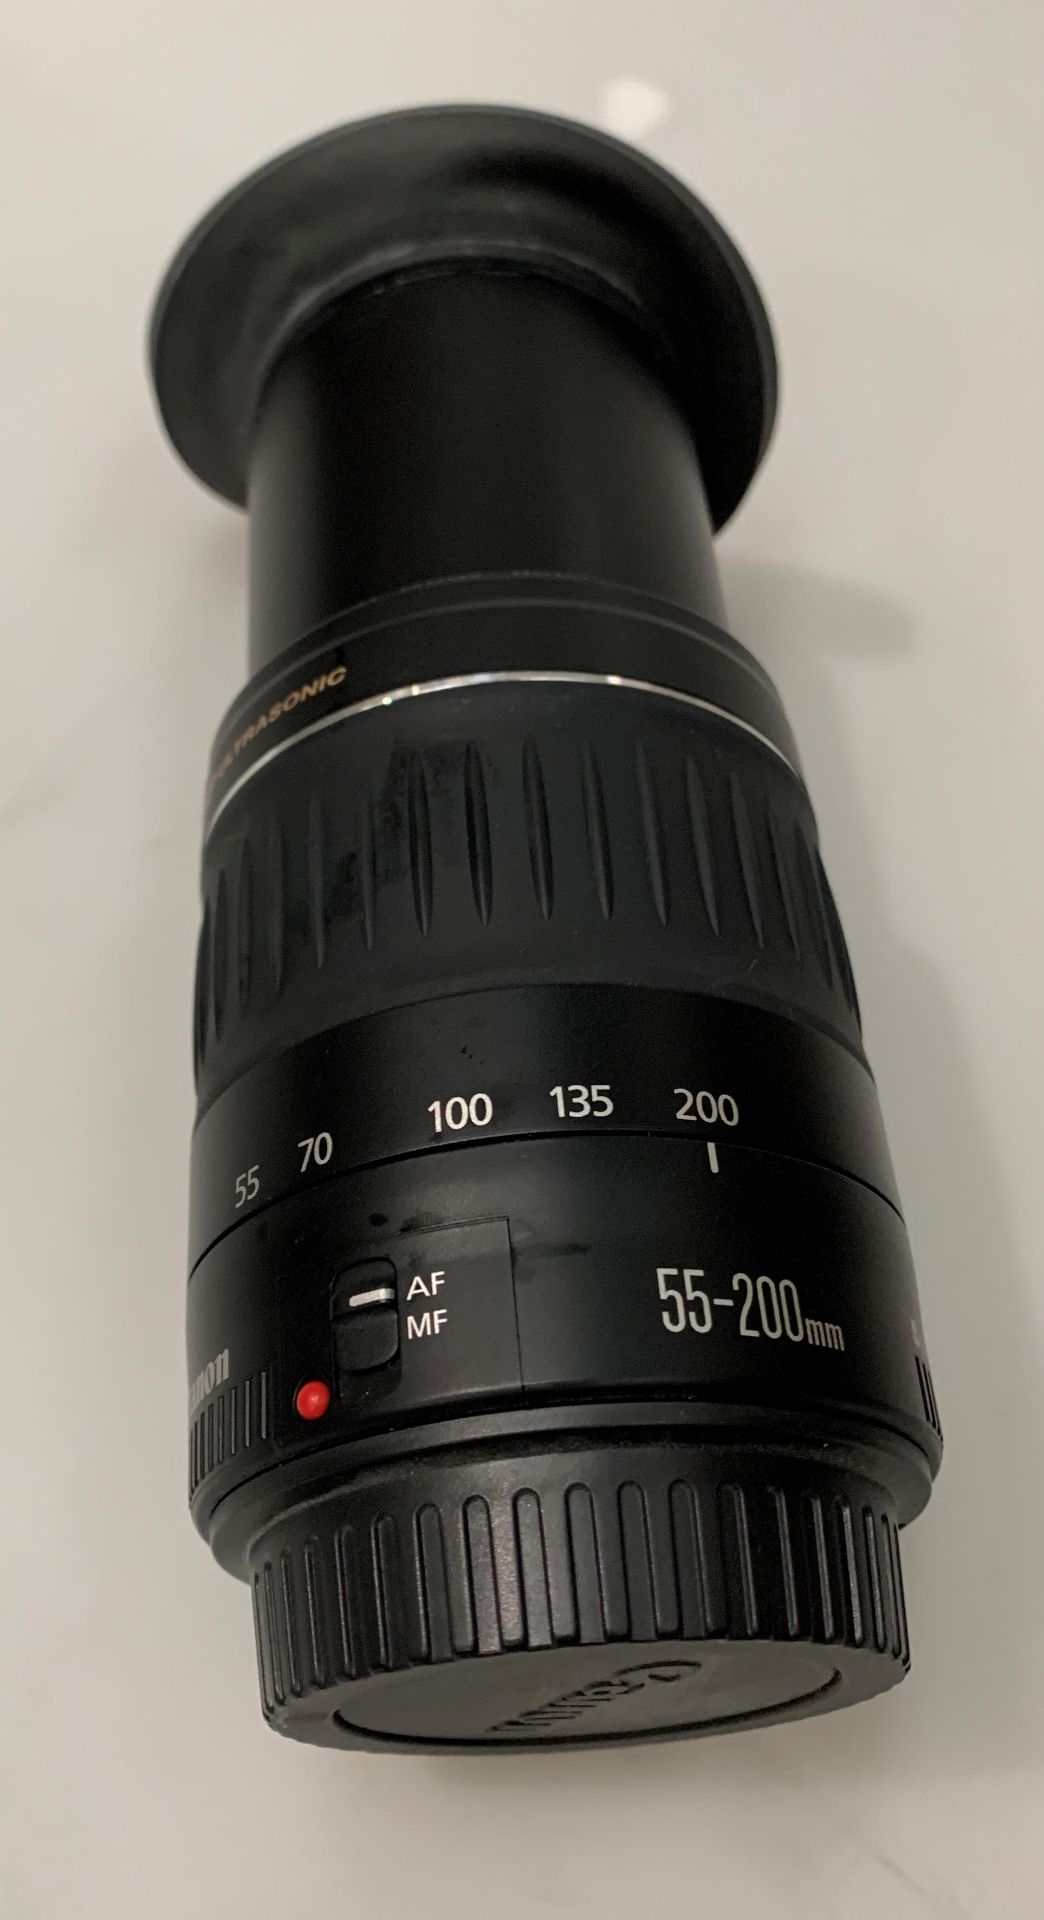 Canon Zoom lens EF 55-200mm complete with Lowepro Case - Image 3 of 4